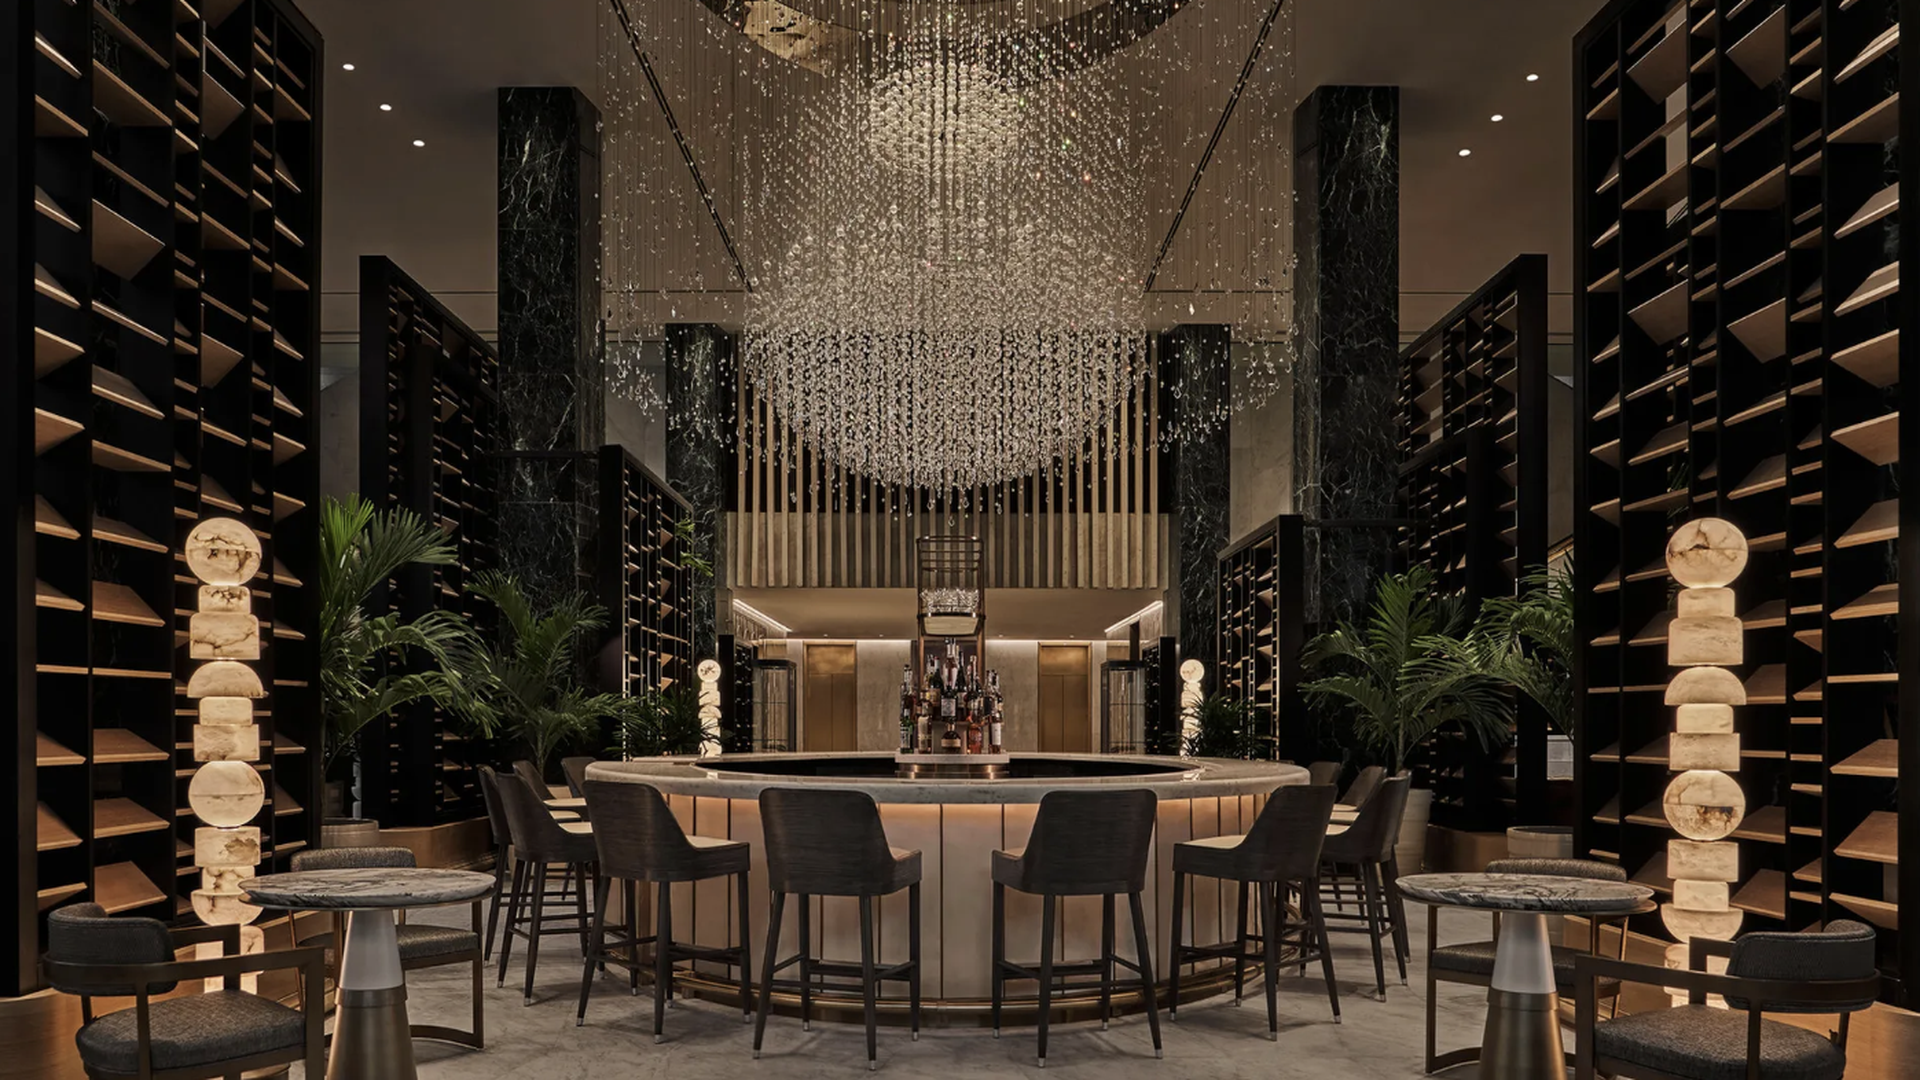 The Chandelier Bar at the Four Seasons New Orleans. Photo: Christian Horan/Courtesy of Four Seasons